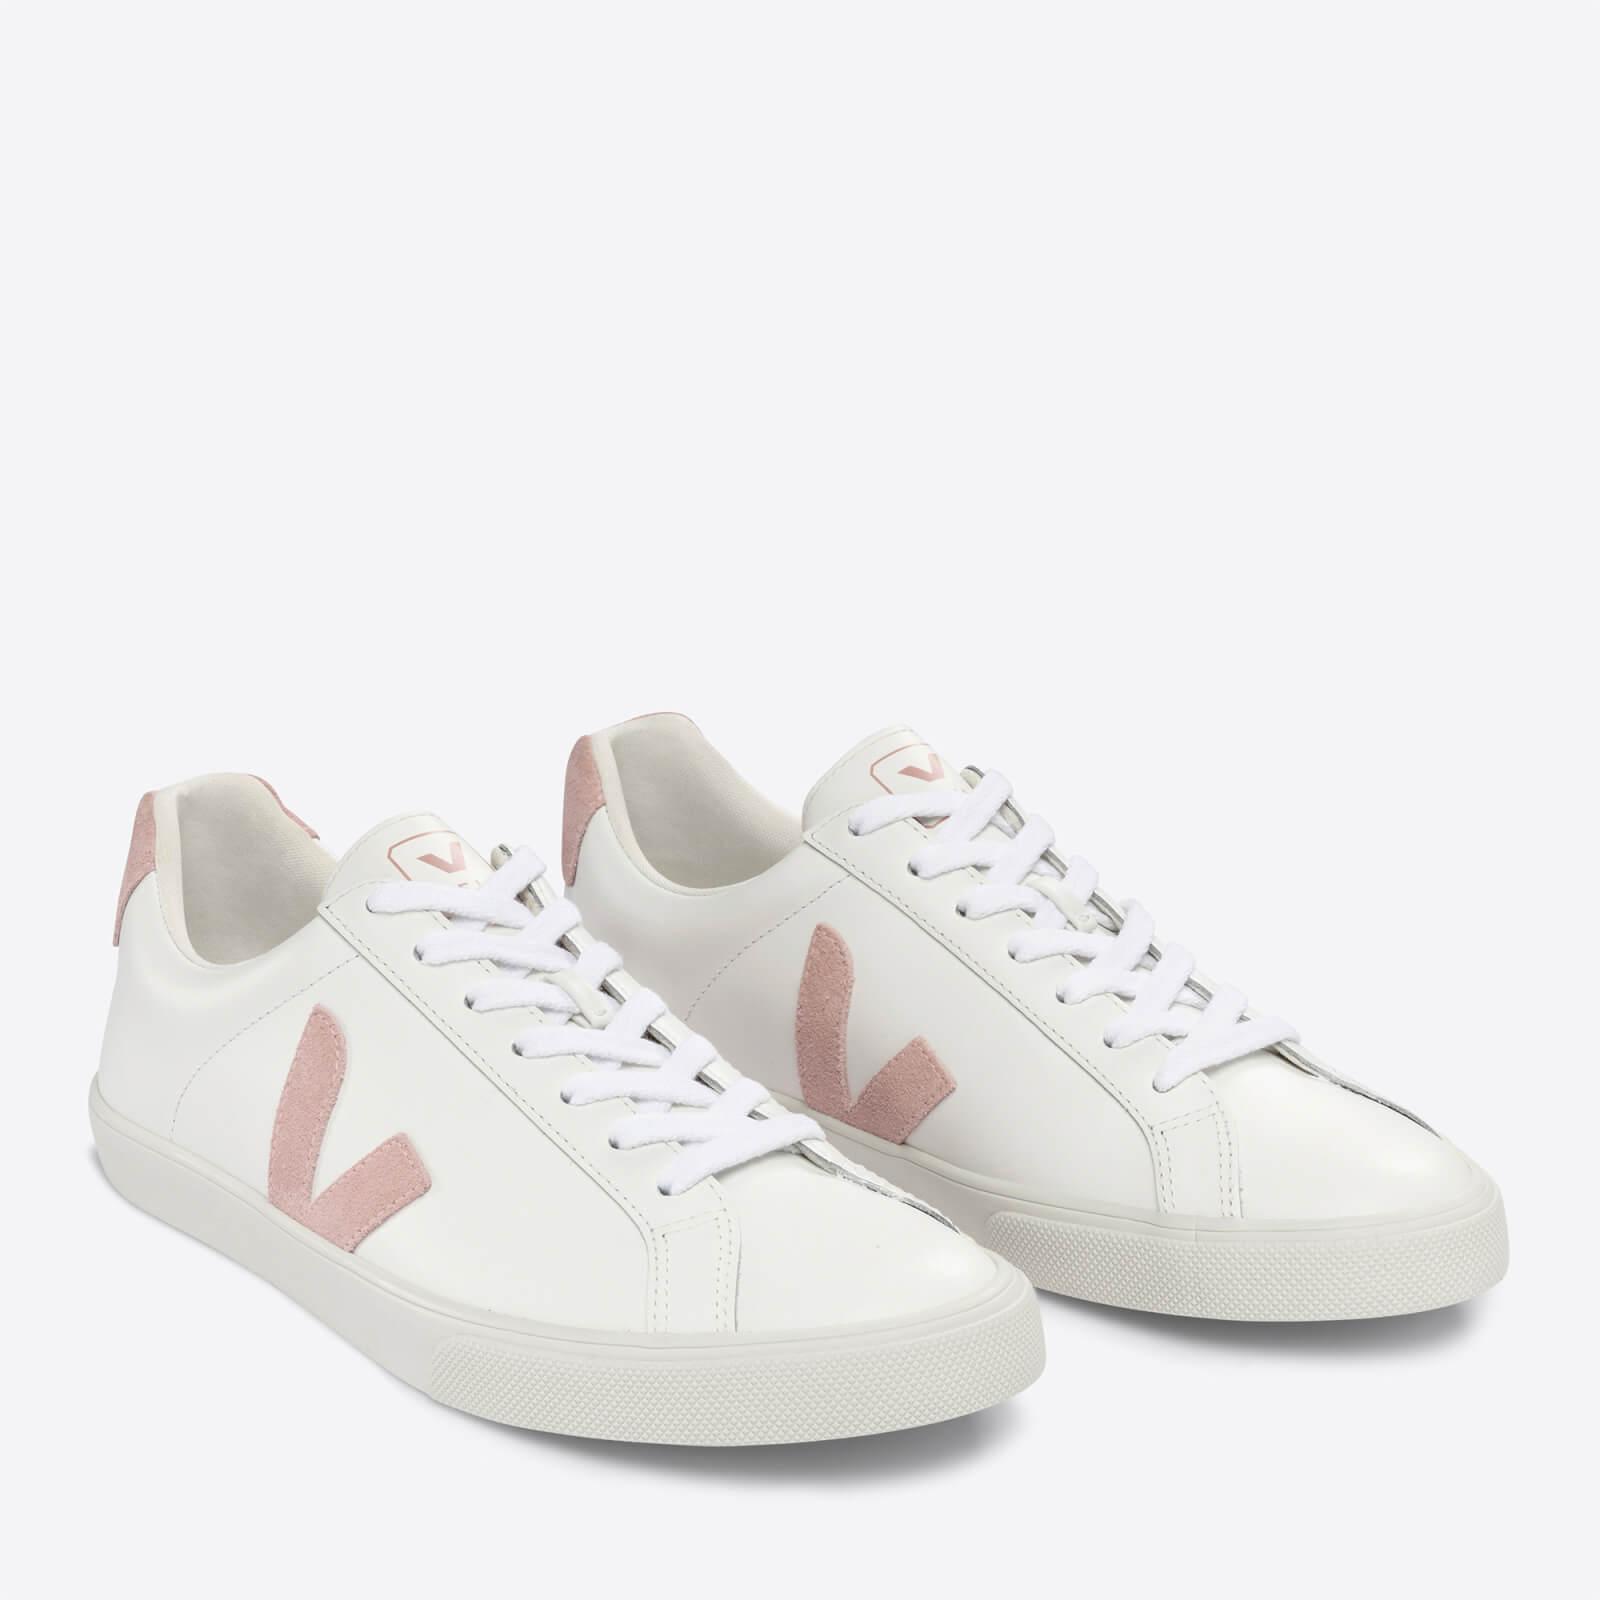 Veja Esplar Leather And Suede Trainers in White | Lyst